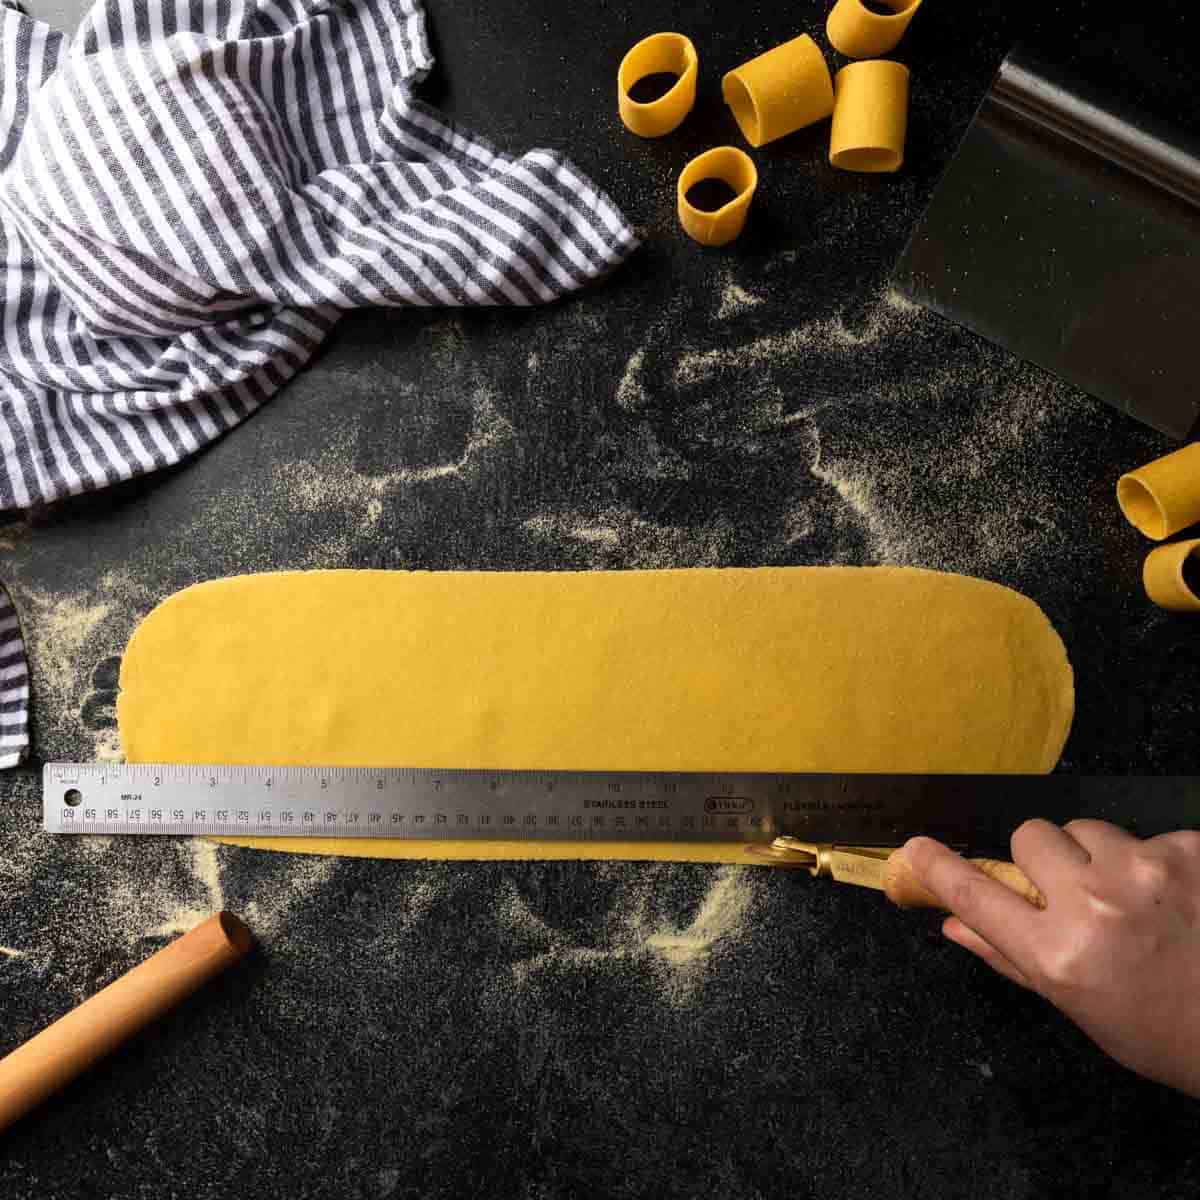 Using a brass pasta wheel and ruler to square a sheet of pasta dough